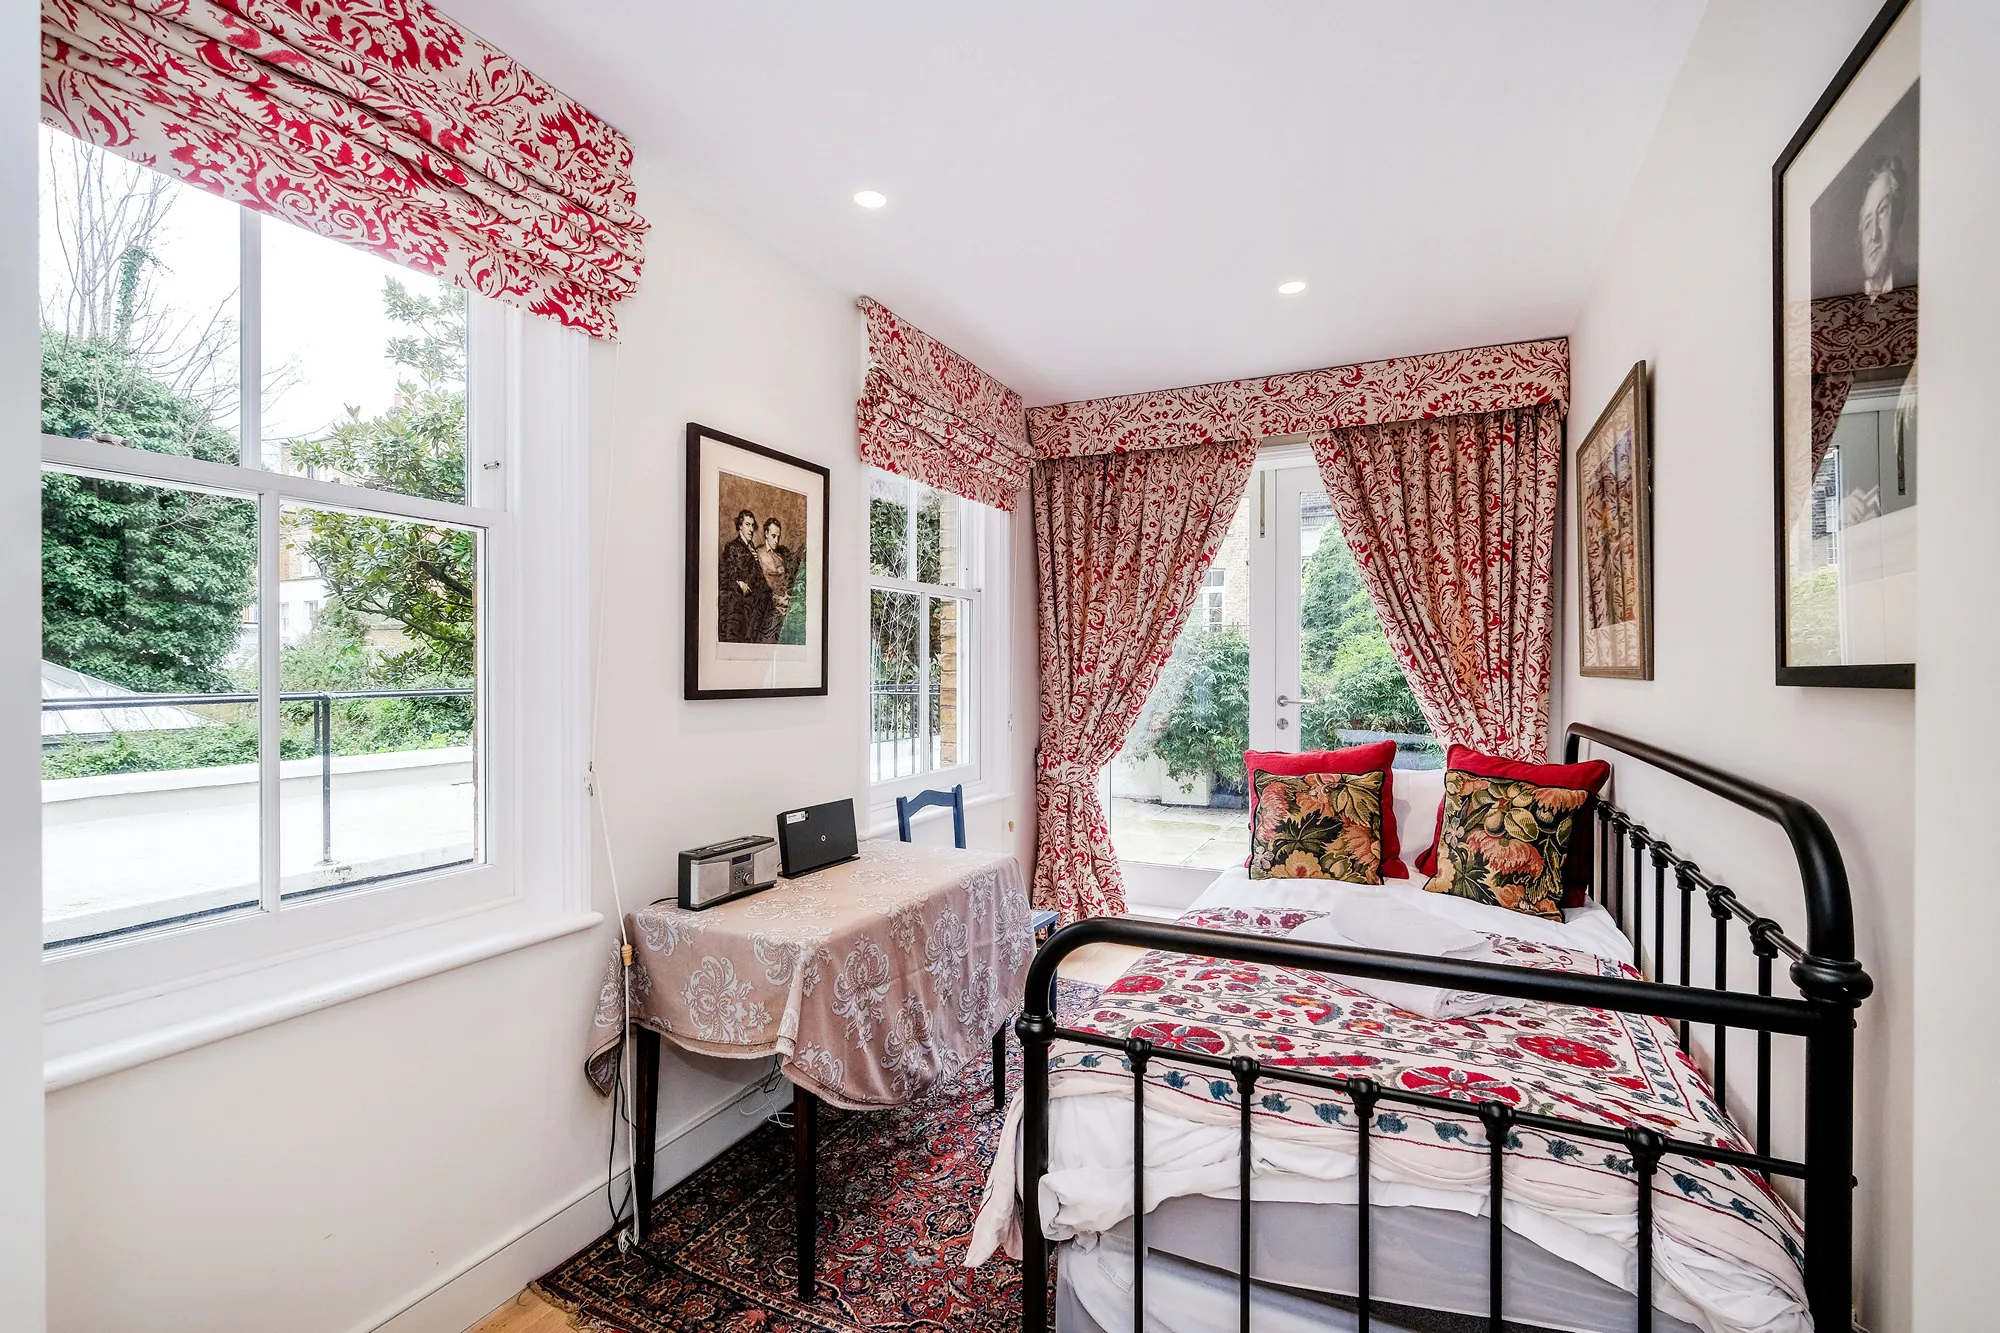 Woodfall Street, holiday home in Chelsea, London